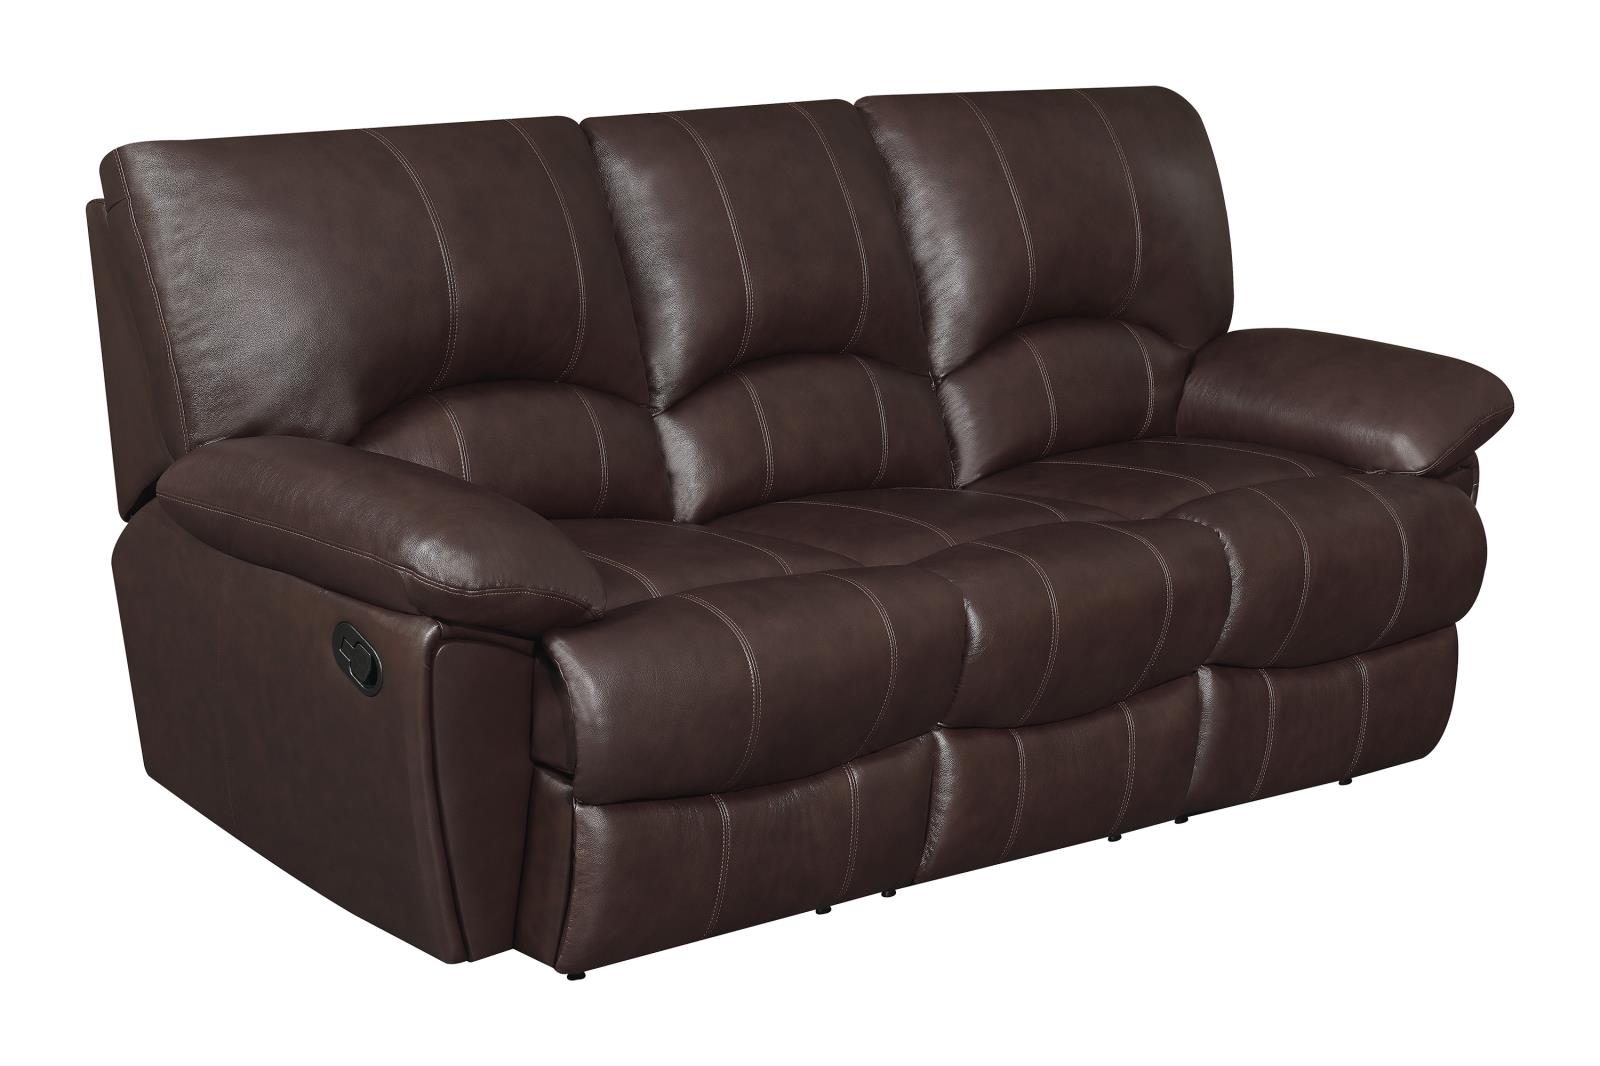 Clifford Pillow Top Arm Motion Sofa Chocolate - What A Room